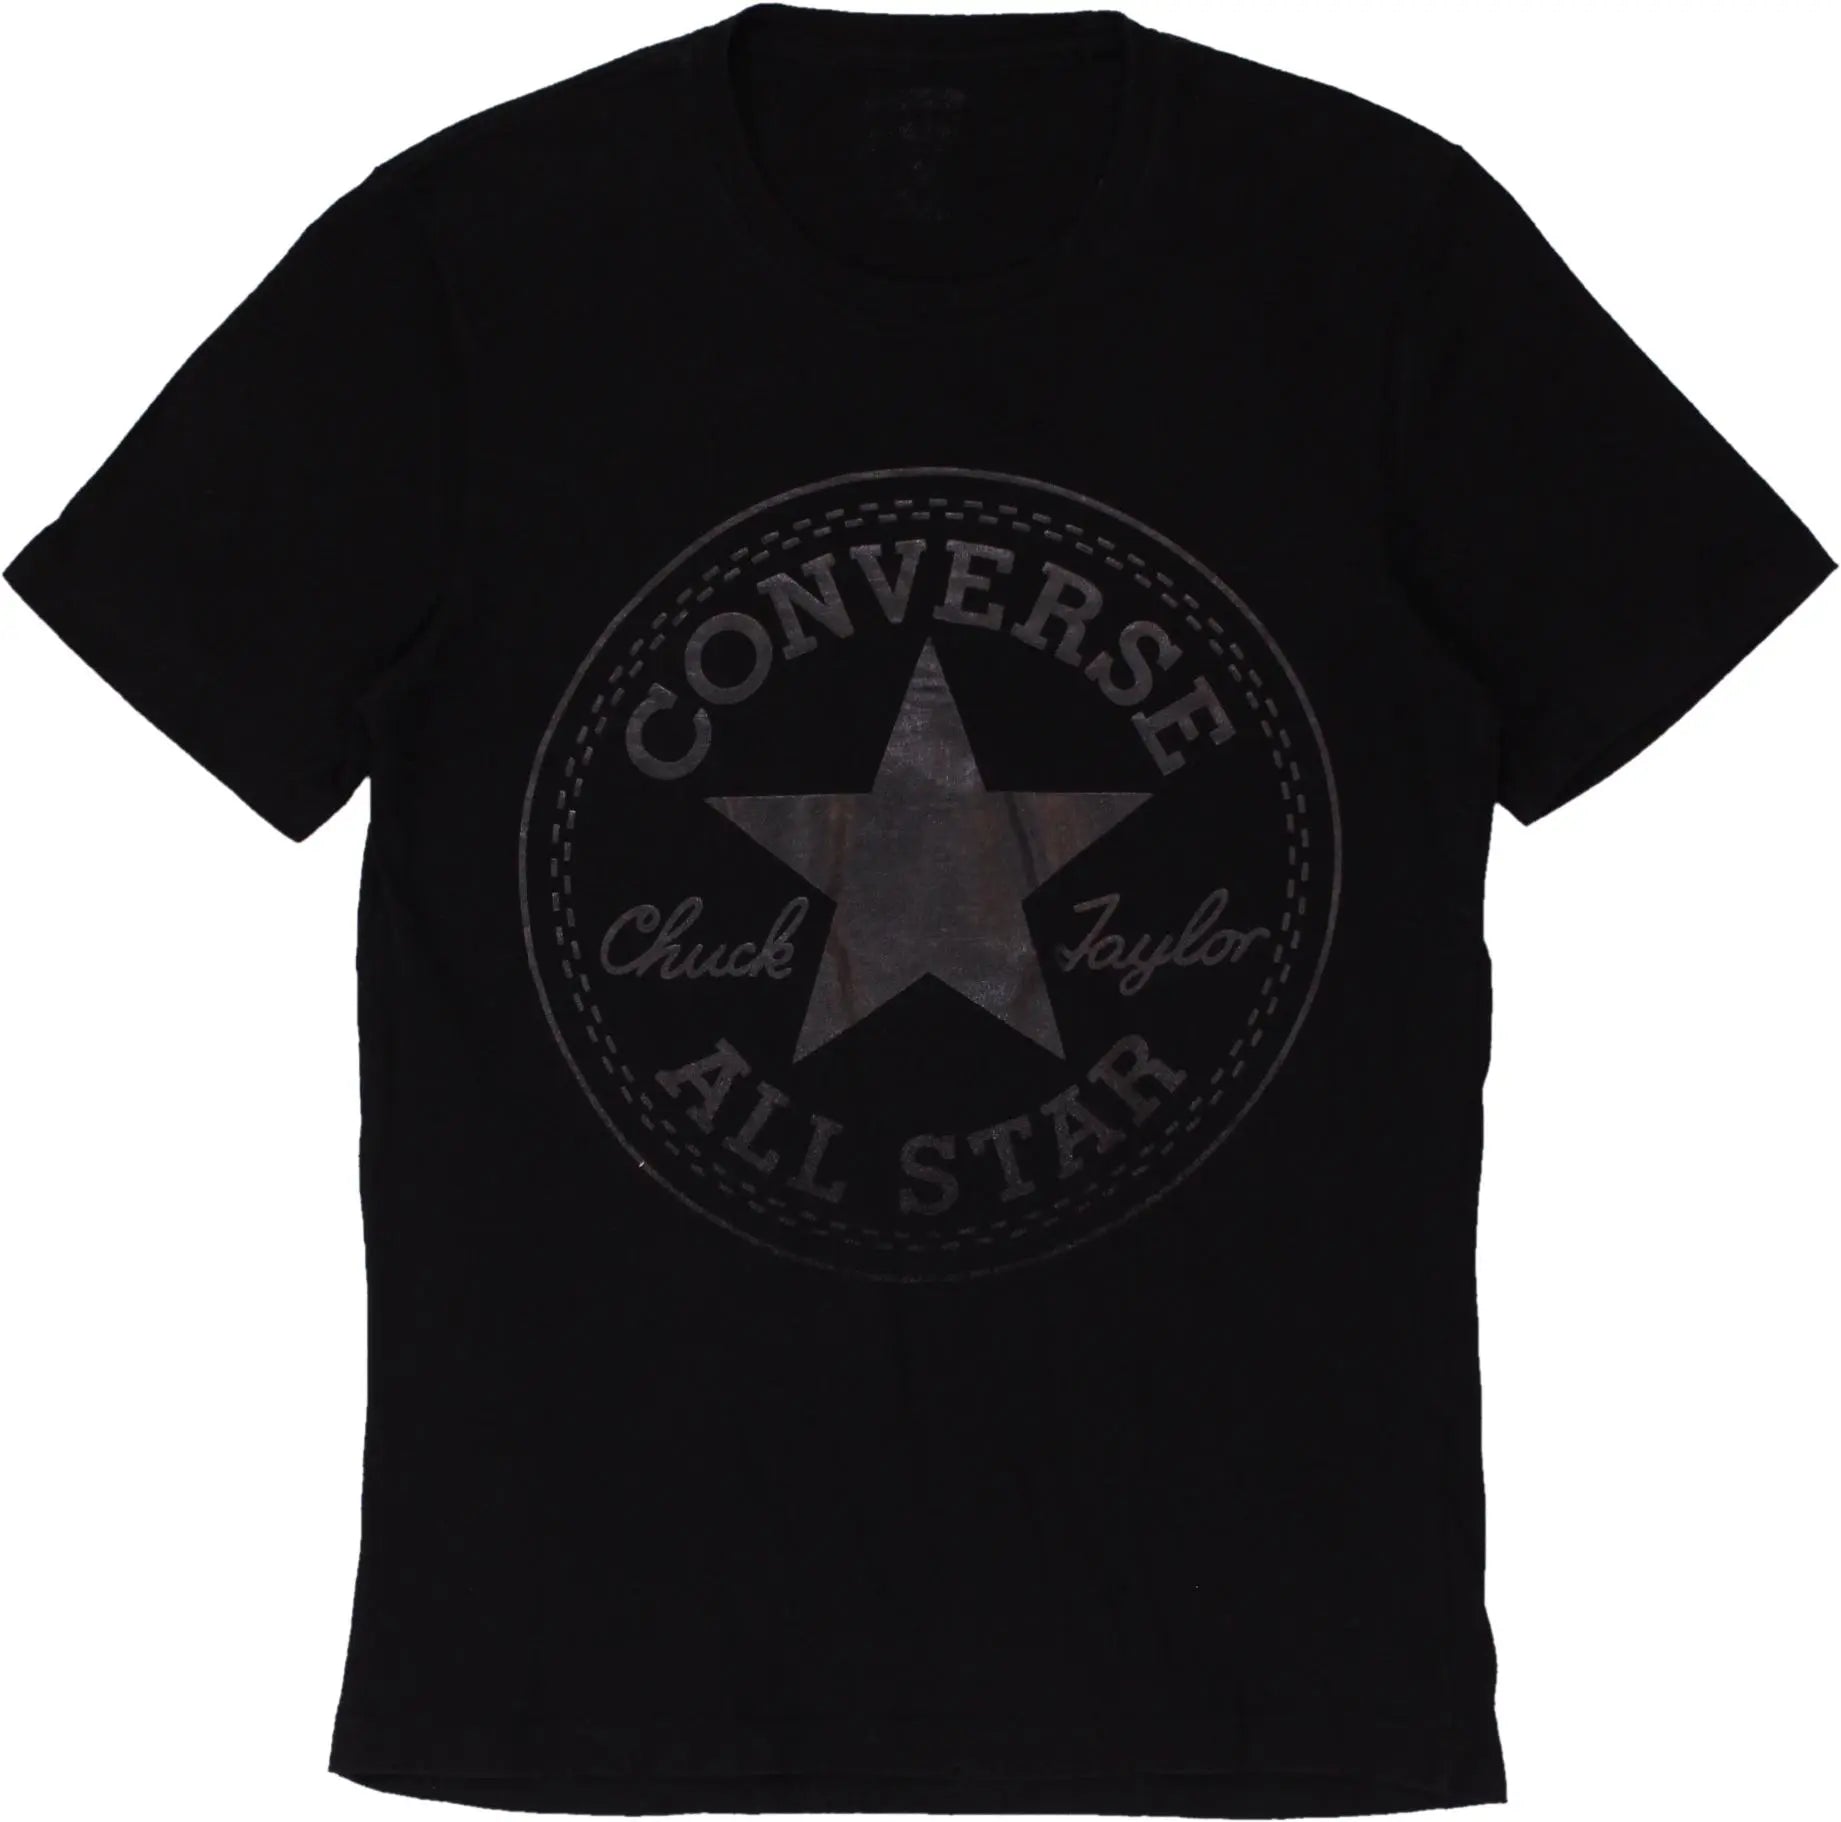 Converse - Black T-shirt by Converse- ThriftTale.com - Vintage and second handclothing